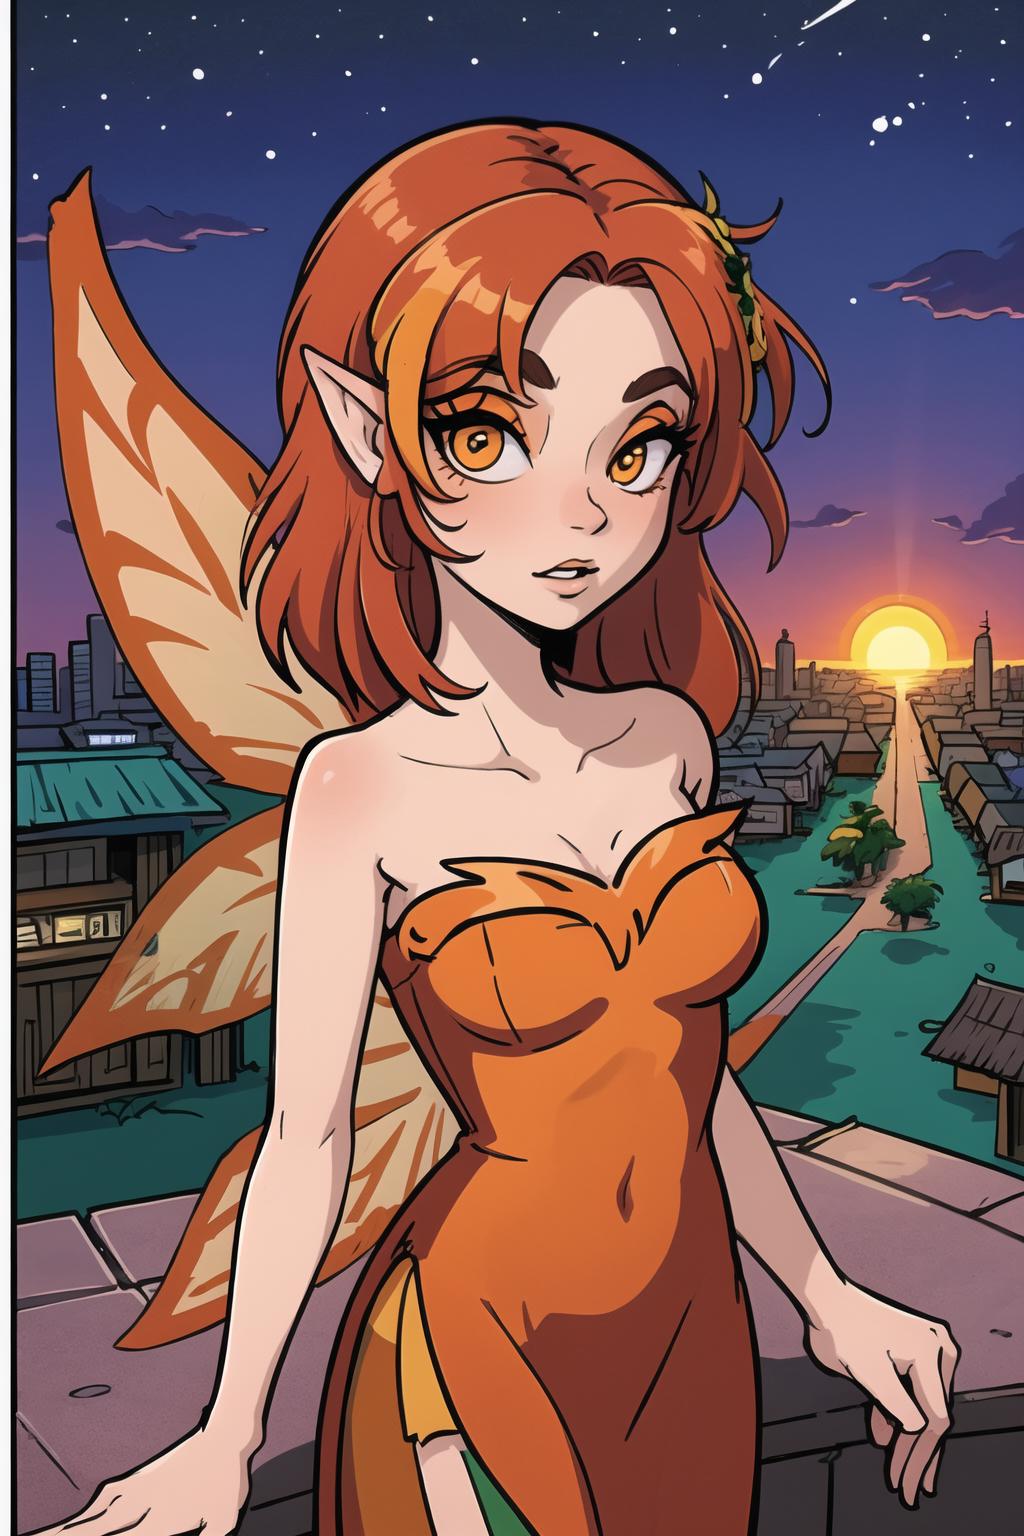 Fire Faerie - Neopets style fire fairy image by FaeFlan